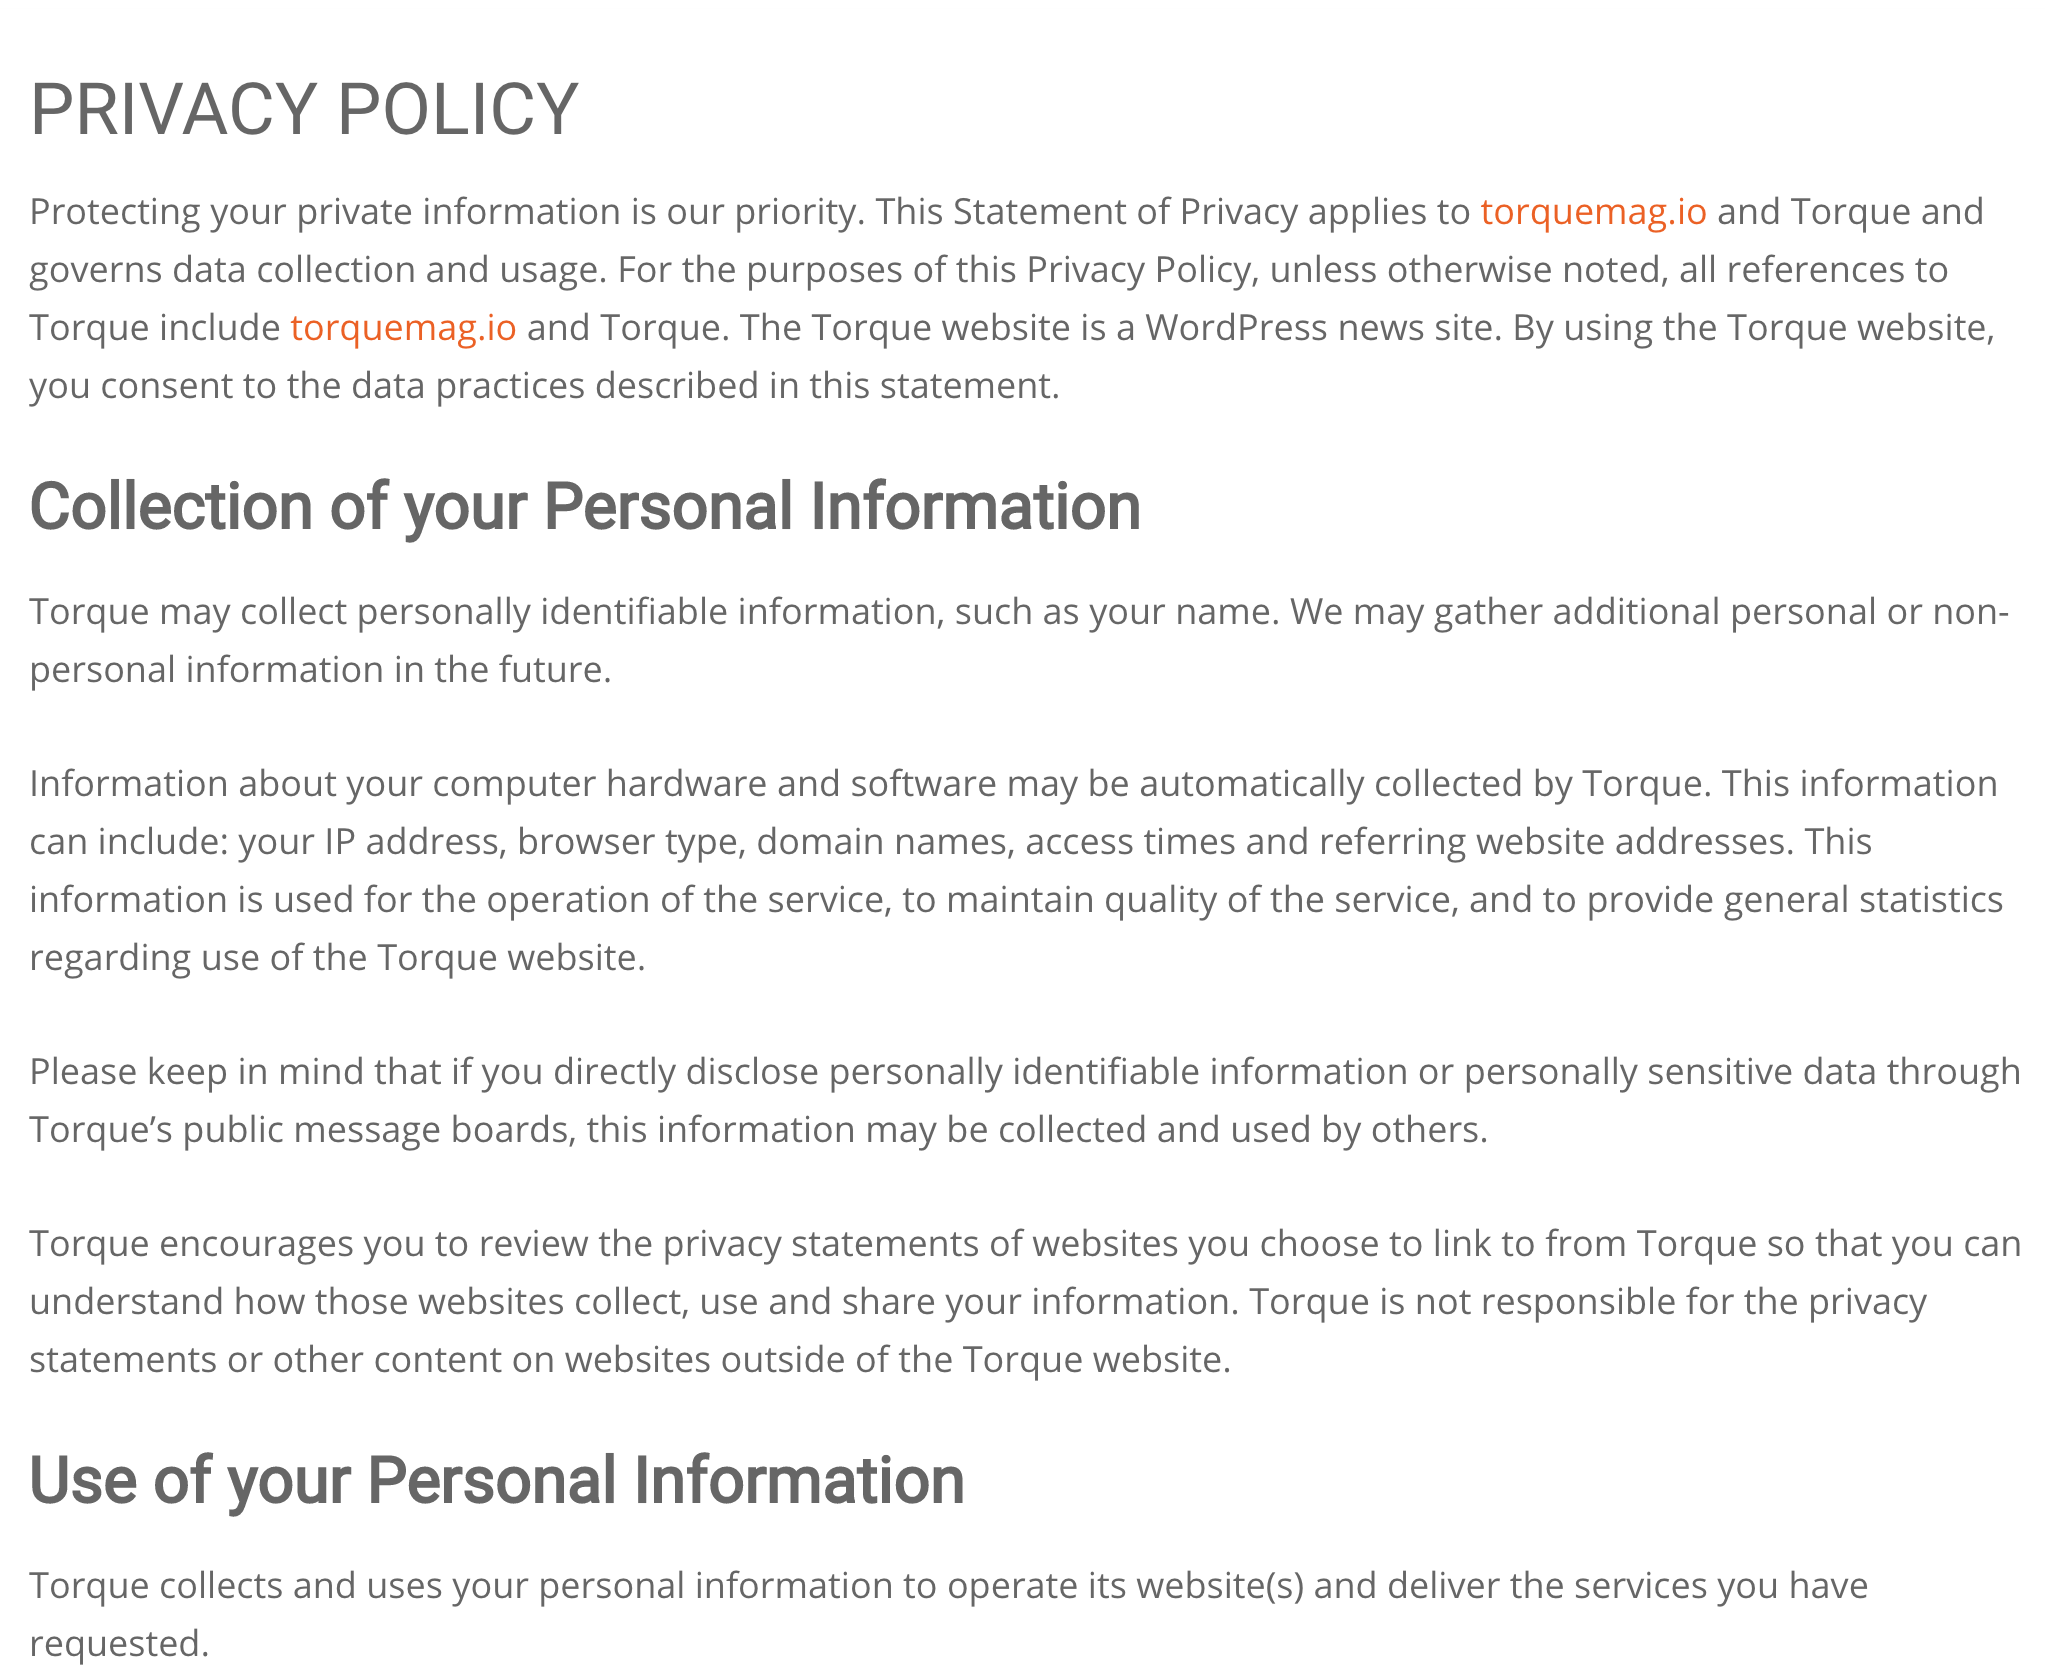 An example of Torque's privacy policy.